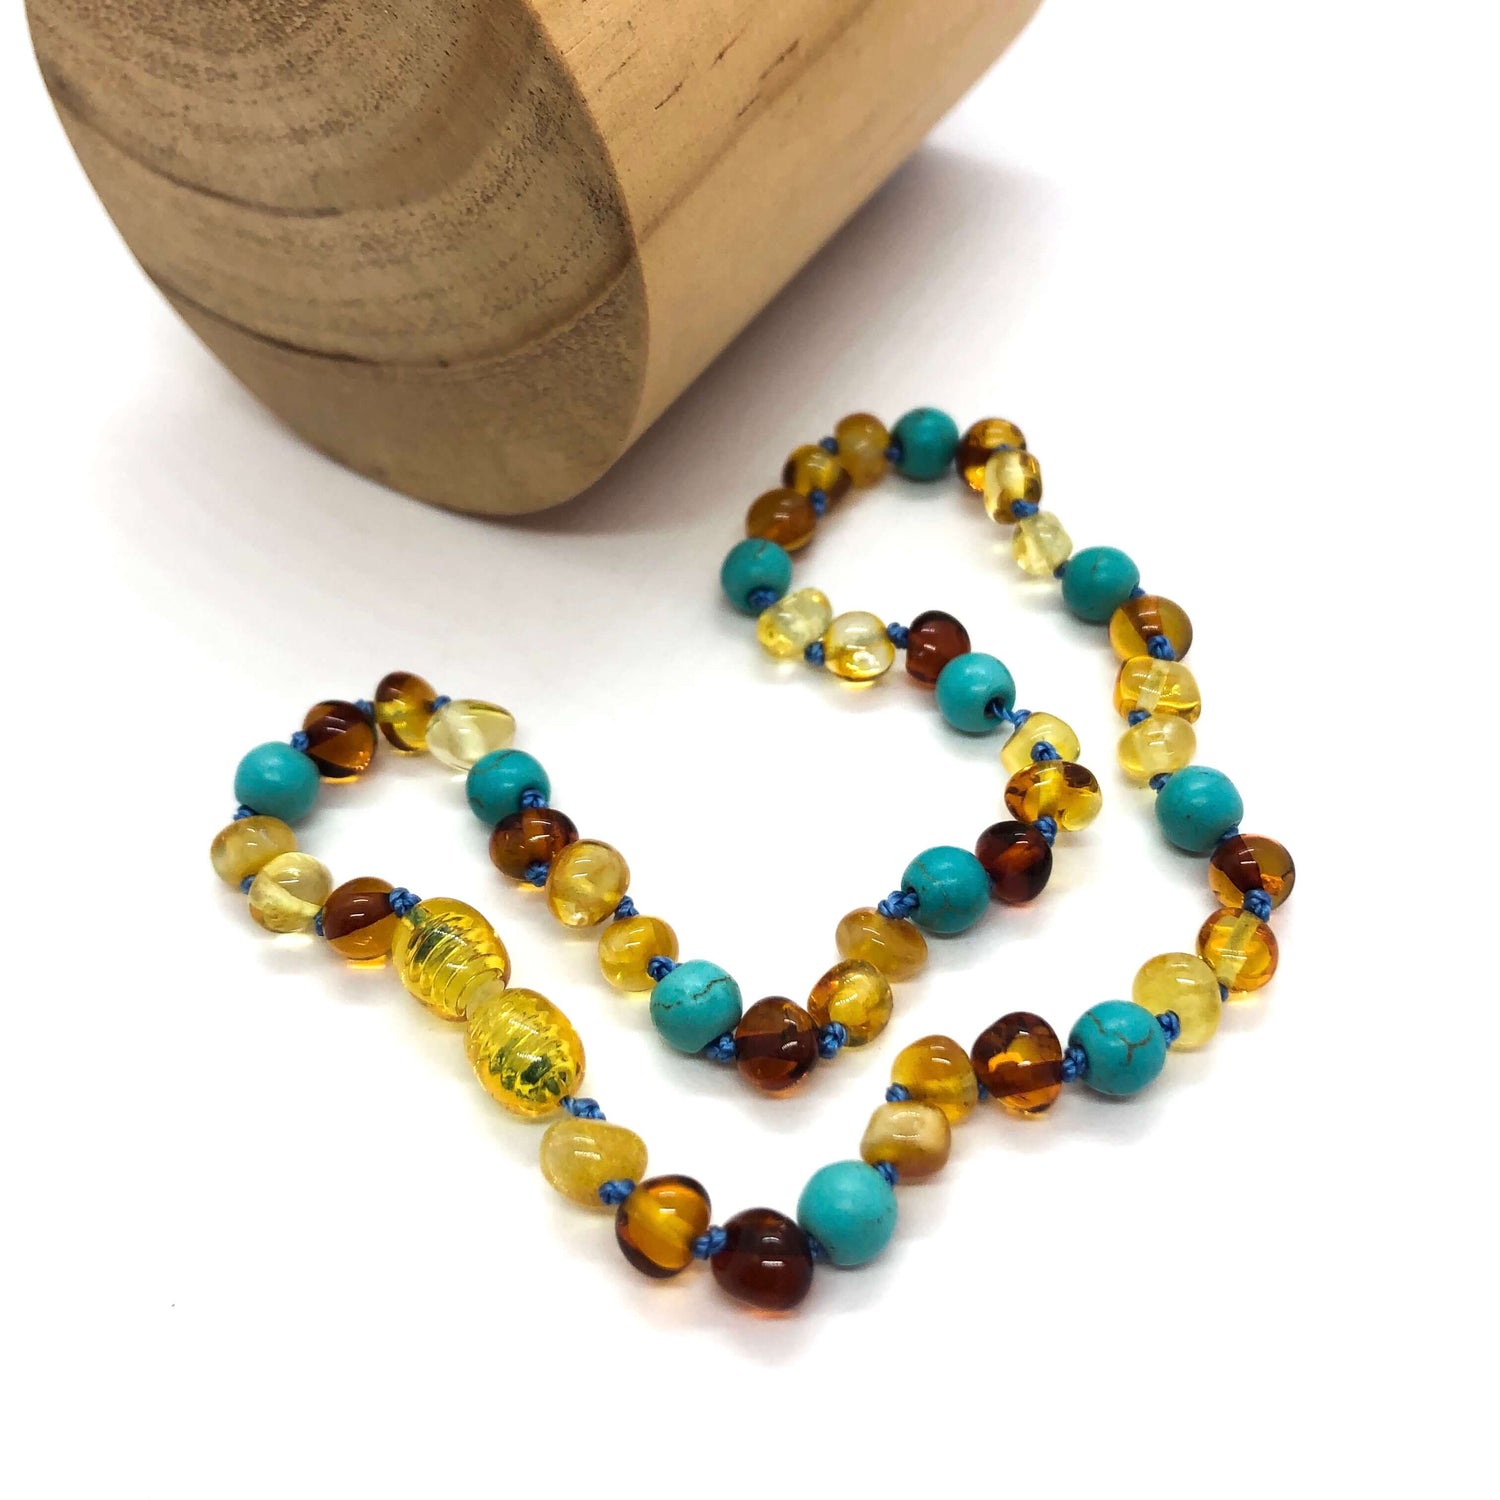 Buy Baby Amber Teething Necklace Honey Raw Amber Beads / 50% Richer and  Higher in Value/Anti. Online at Low Prices in India - Amazon.in